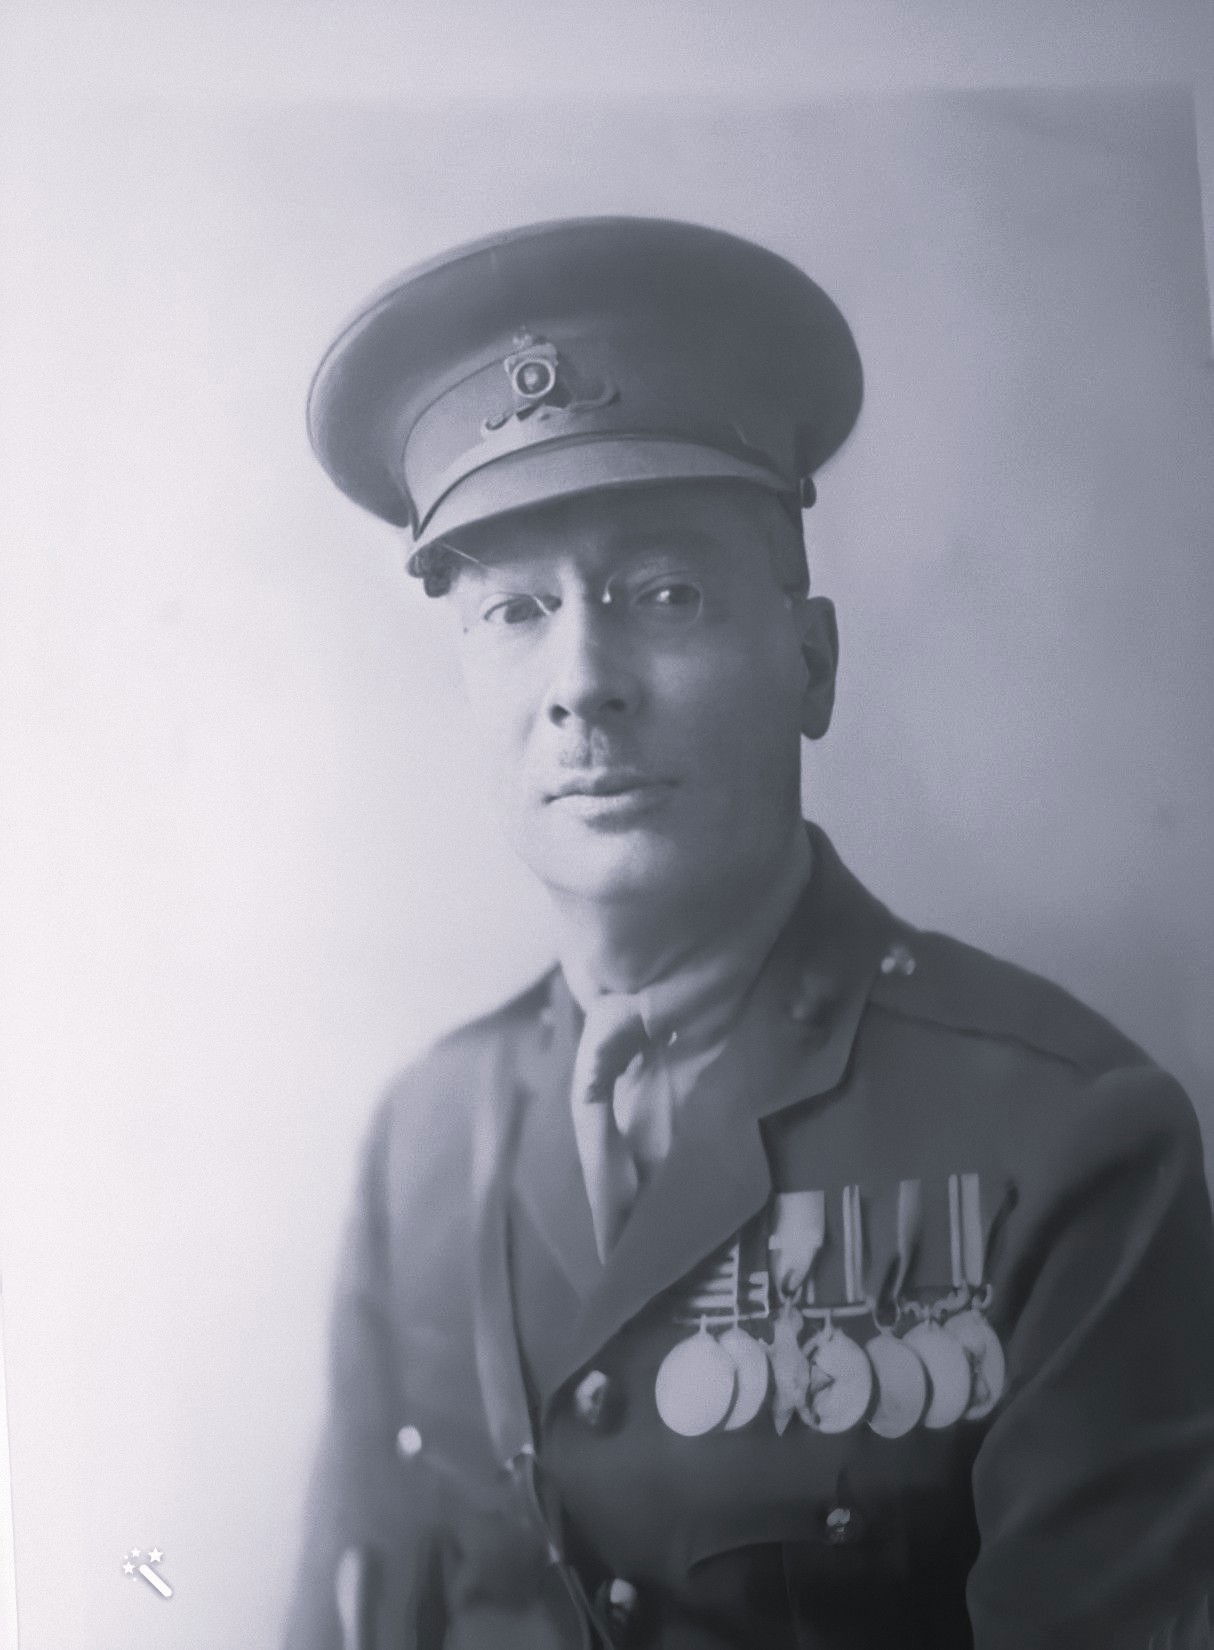 CALVERT, Harry Campbell. Captain Royal Field Artillery formerly King's Colonials and King Edward's Horse. Photograph courtesy of his great grandson, James Morgan and 2x great grandson, Rod Bull